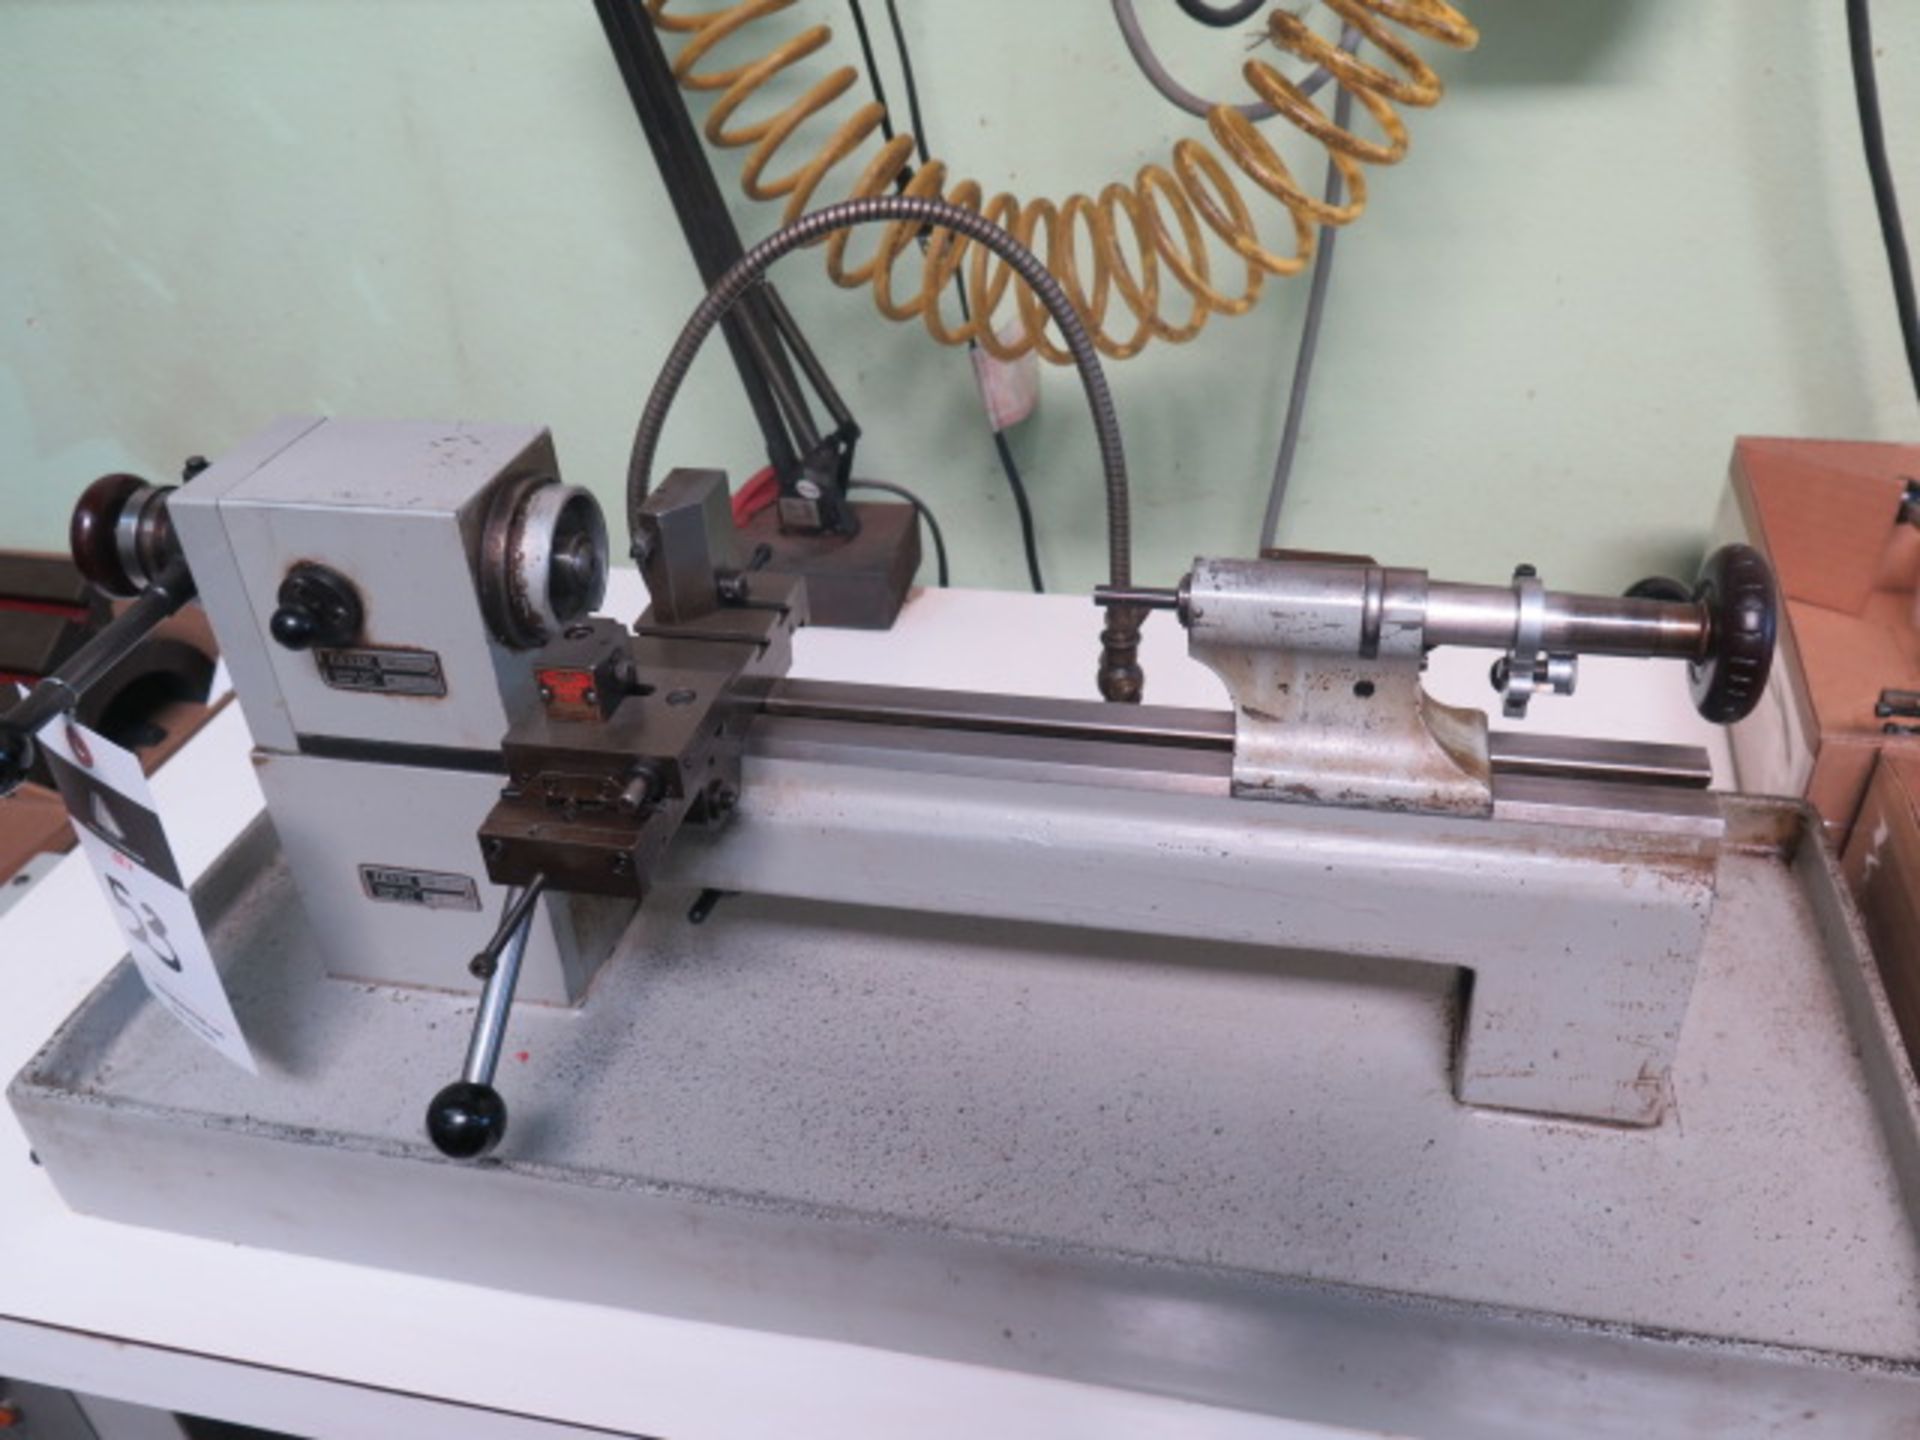 Levin Type 061202 Jewelers Lathe s/n D08913 w/ Cross Slide, Tailstock, Adjustable Spindle RPM - Image 3 of 11